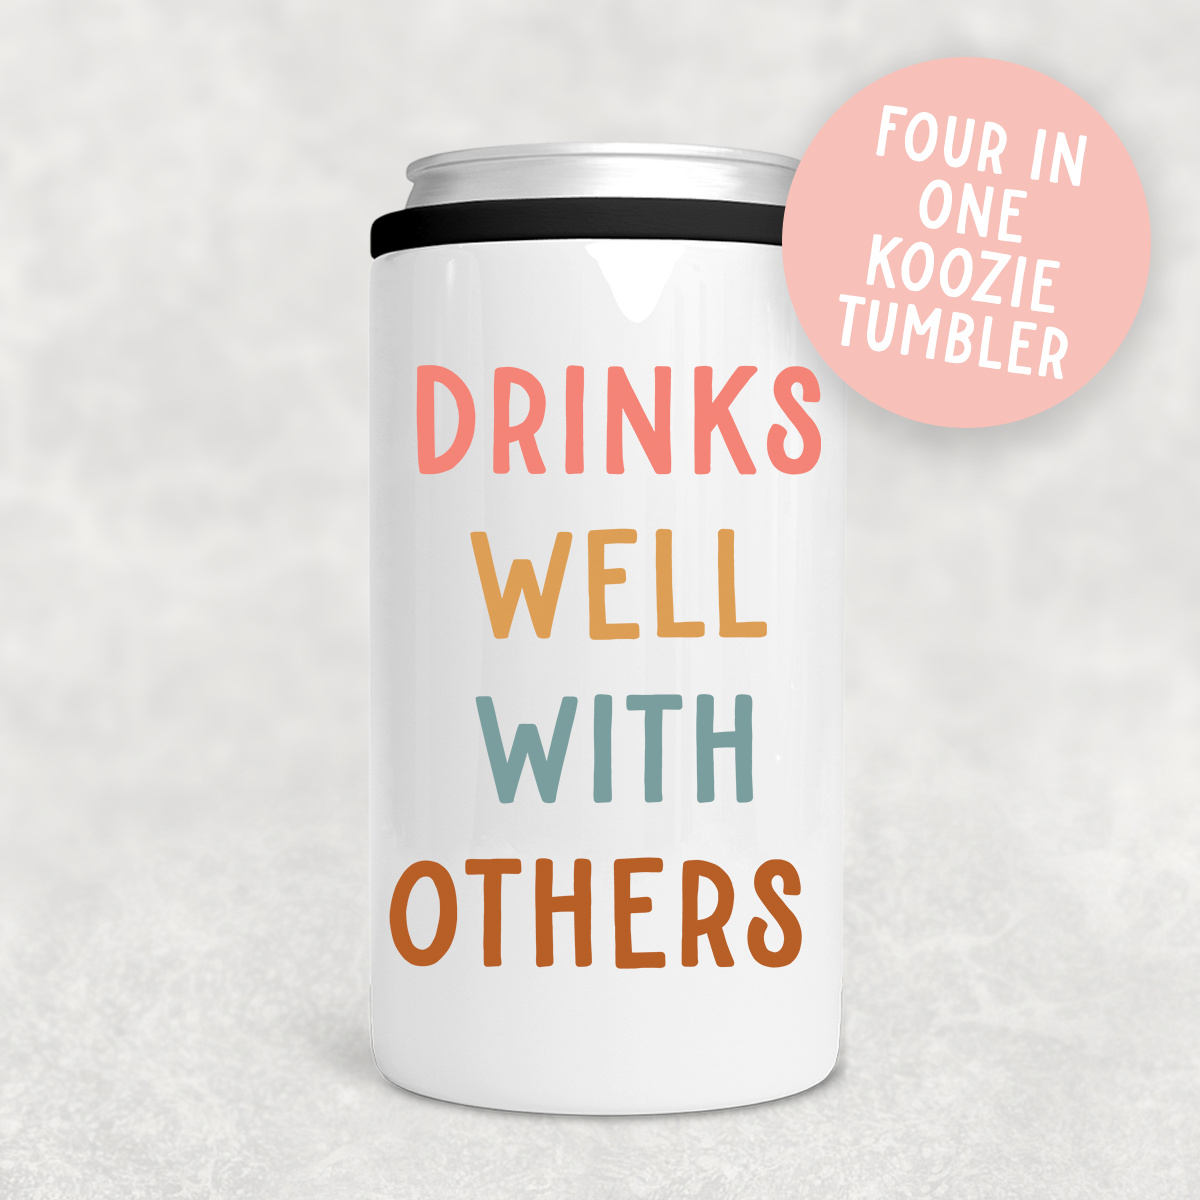 Drinks Well With Others 4 in 1 Tumbler